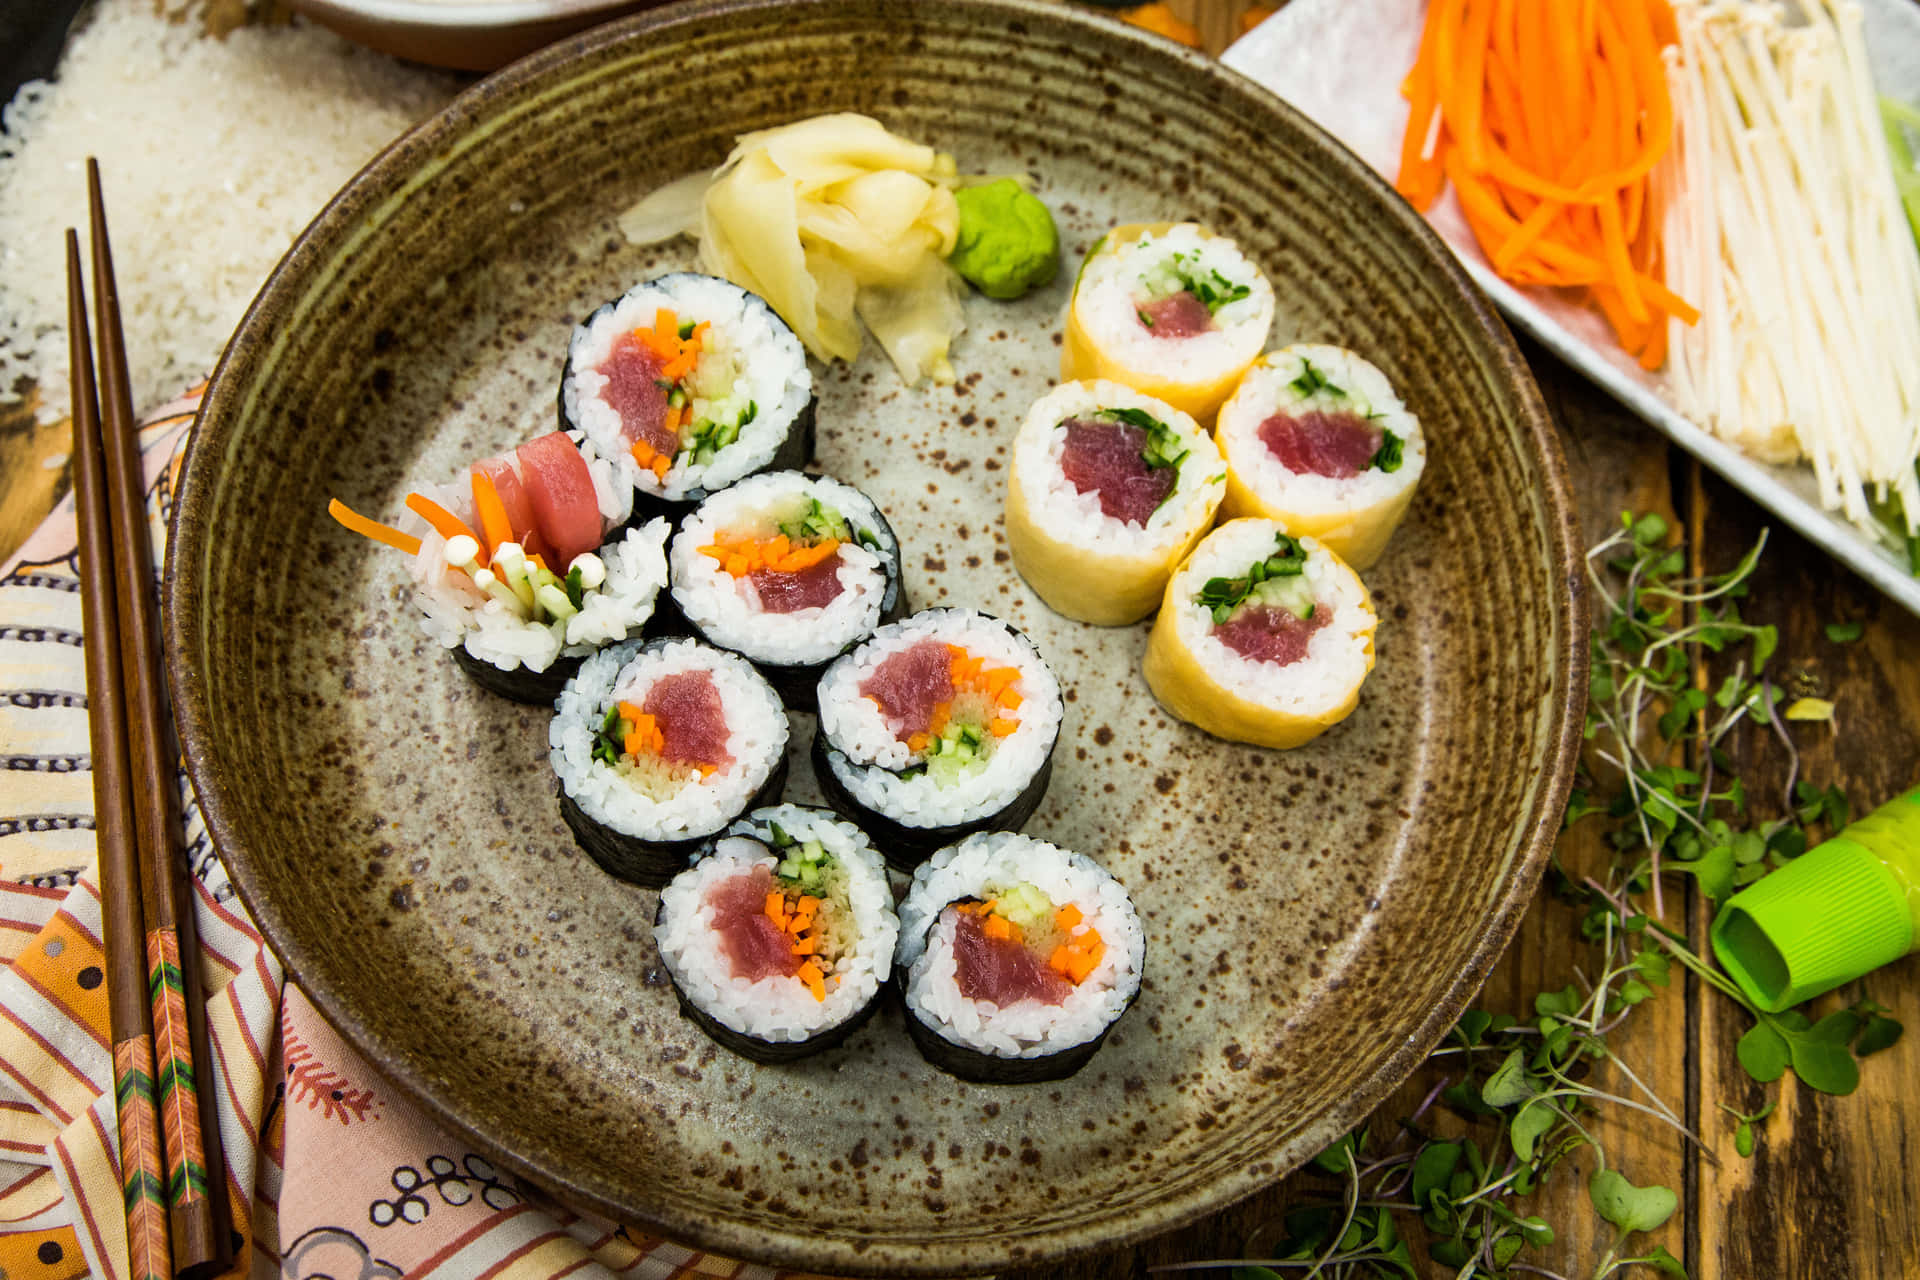 Enjoy a delicious array of sushi on a beautiful wooden platter.